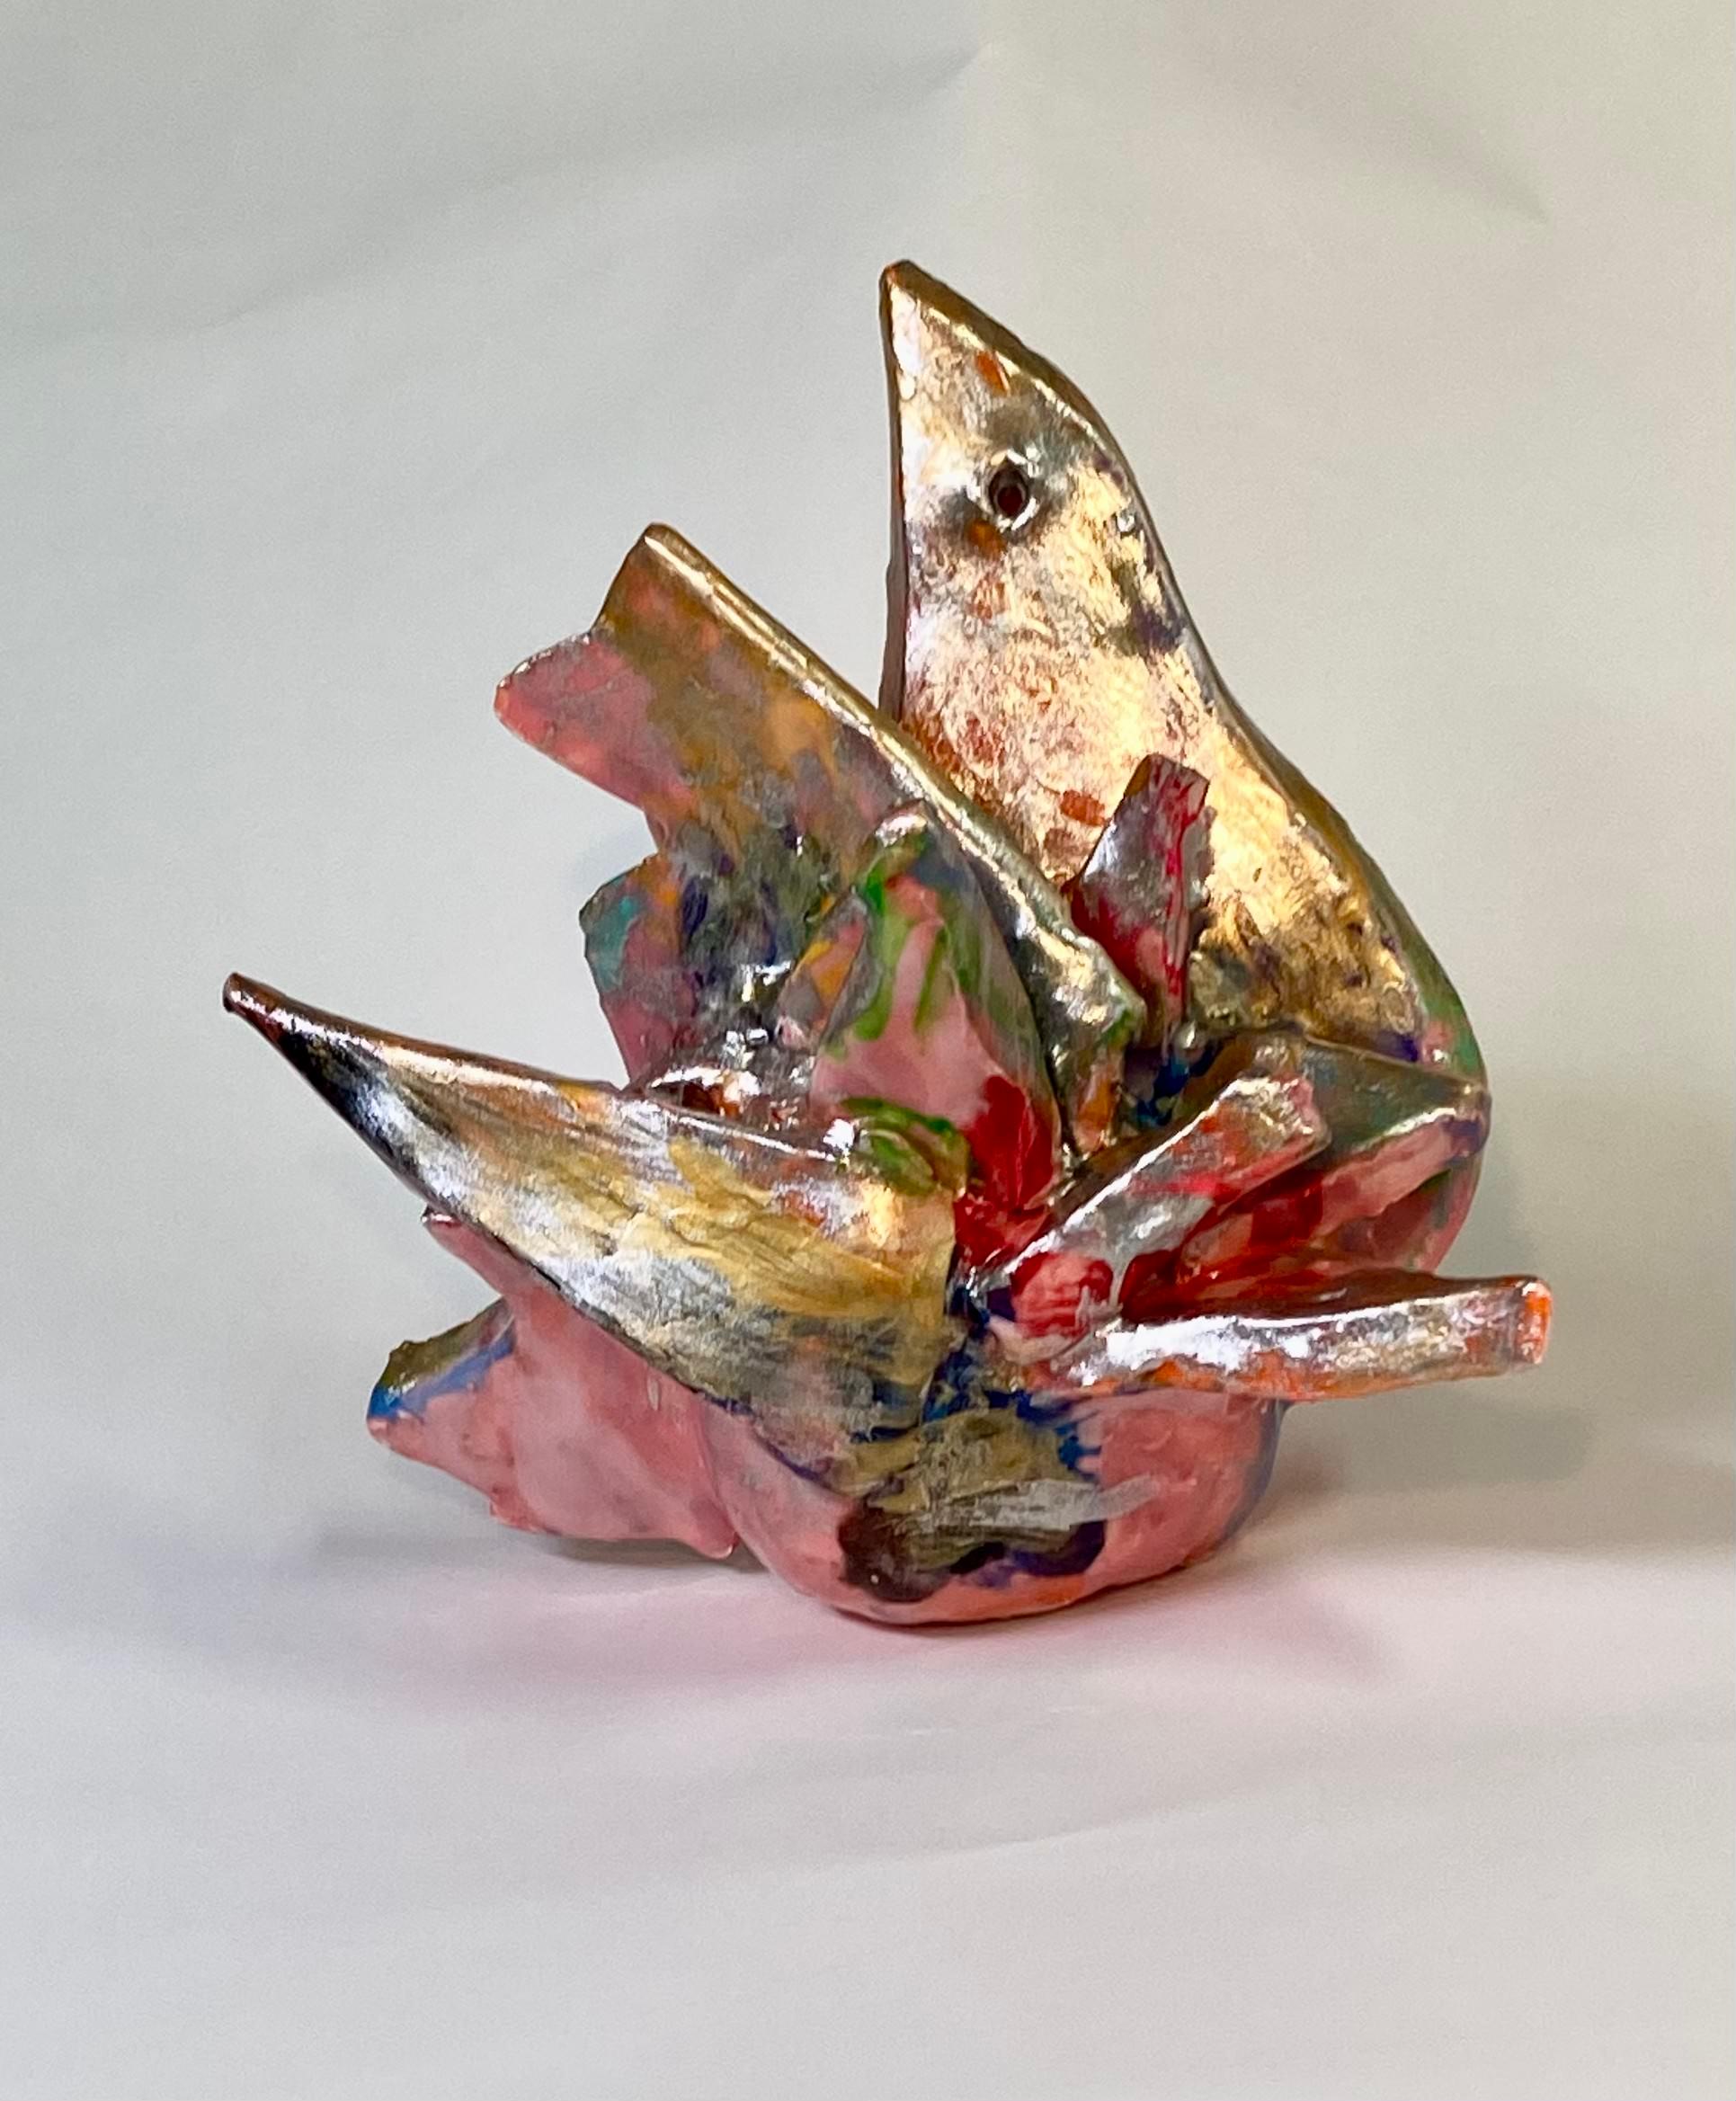 Charo Oquet Still-Life Sculpture - Every which way. Glazed ceramic and enamel.  Abstract Sculpture